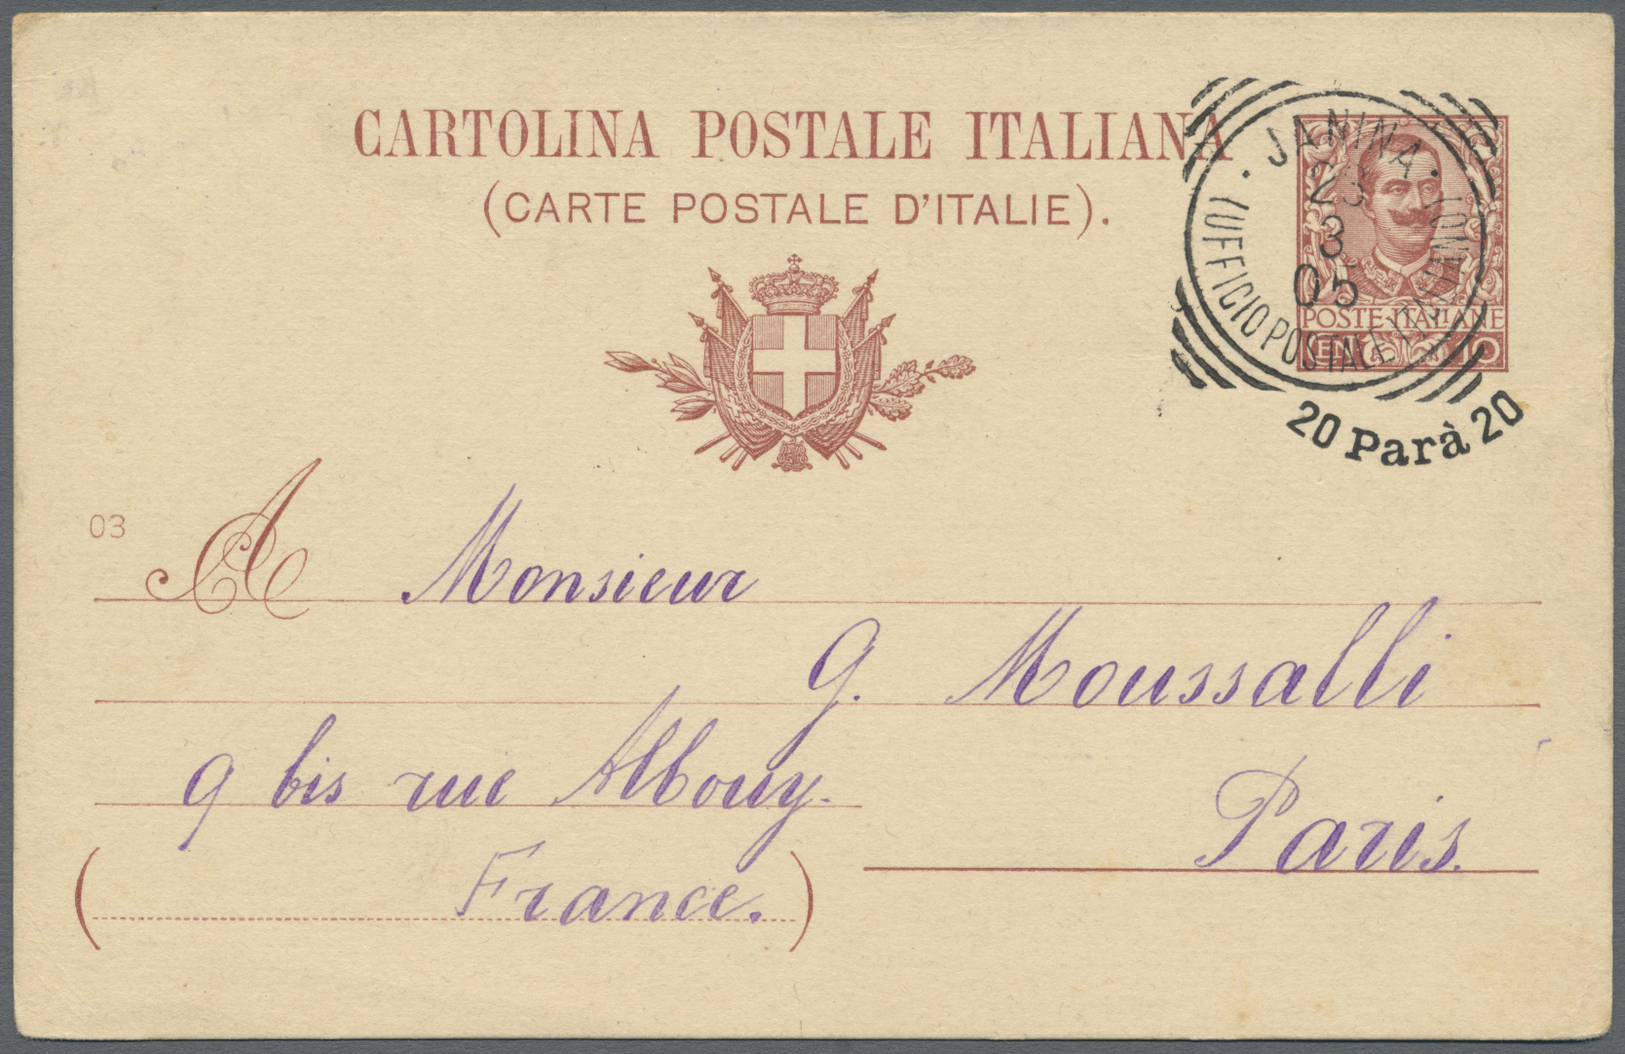 Br Italienische Post In Der Levante: 1905. Ltaly 20 Para On 10c Carmine Postal Stationery Card Addressed To Paris - General Issues